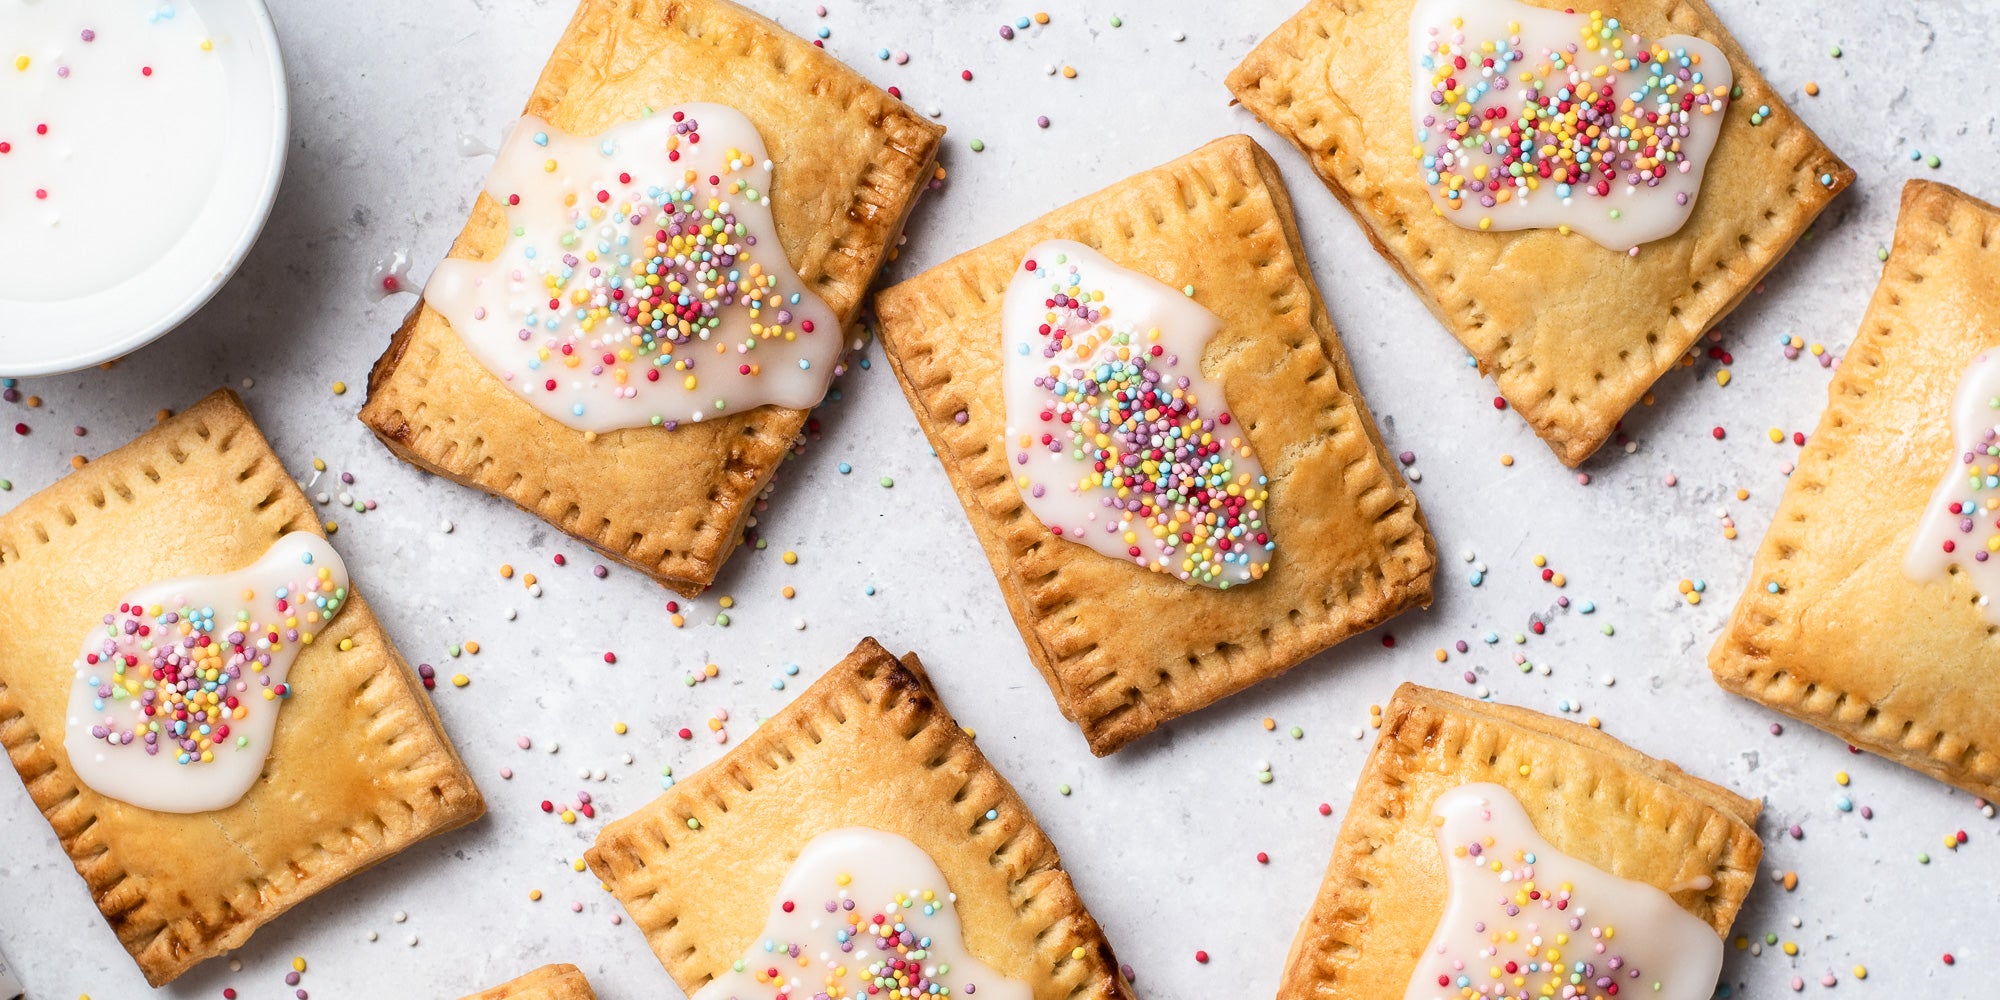 Homemade Pop Tarts with icing and sprinkles. Sprinkles scattered